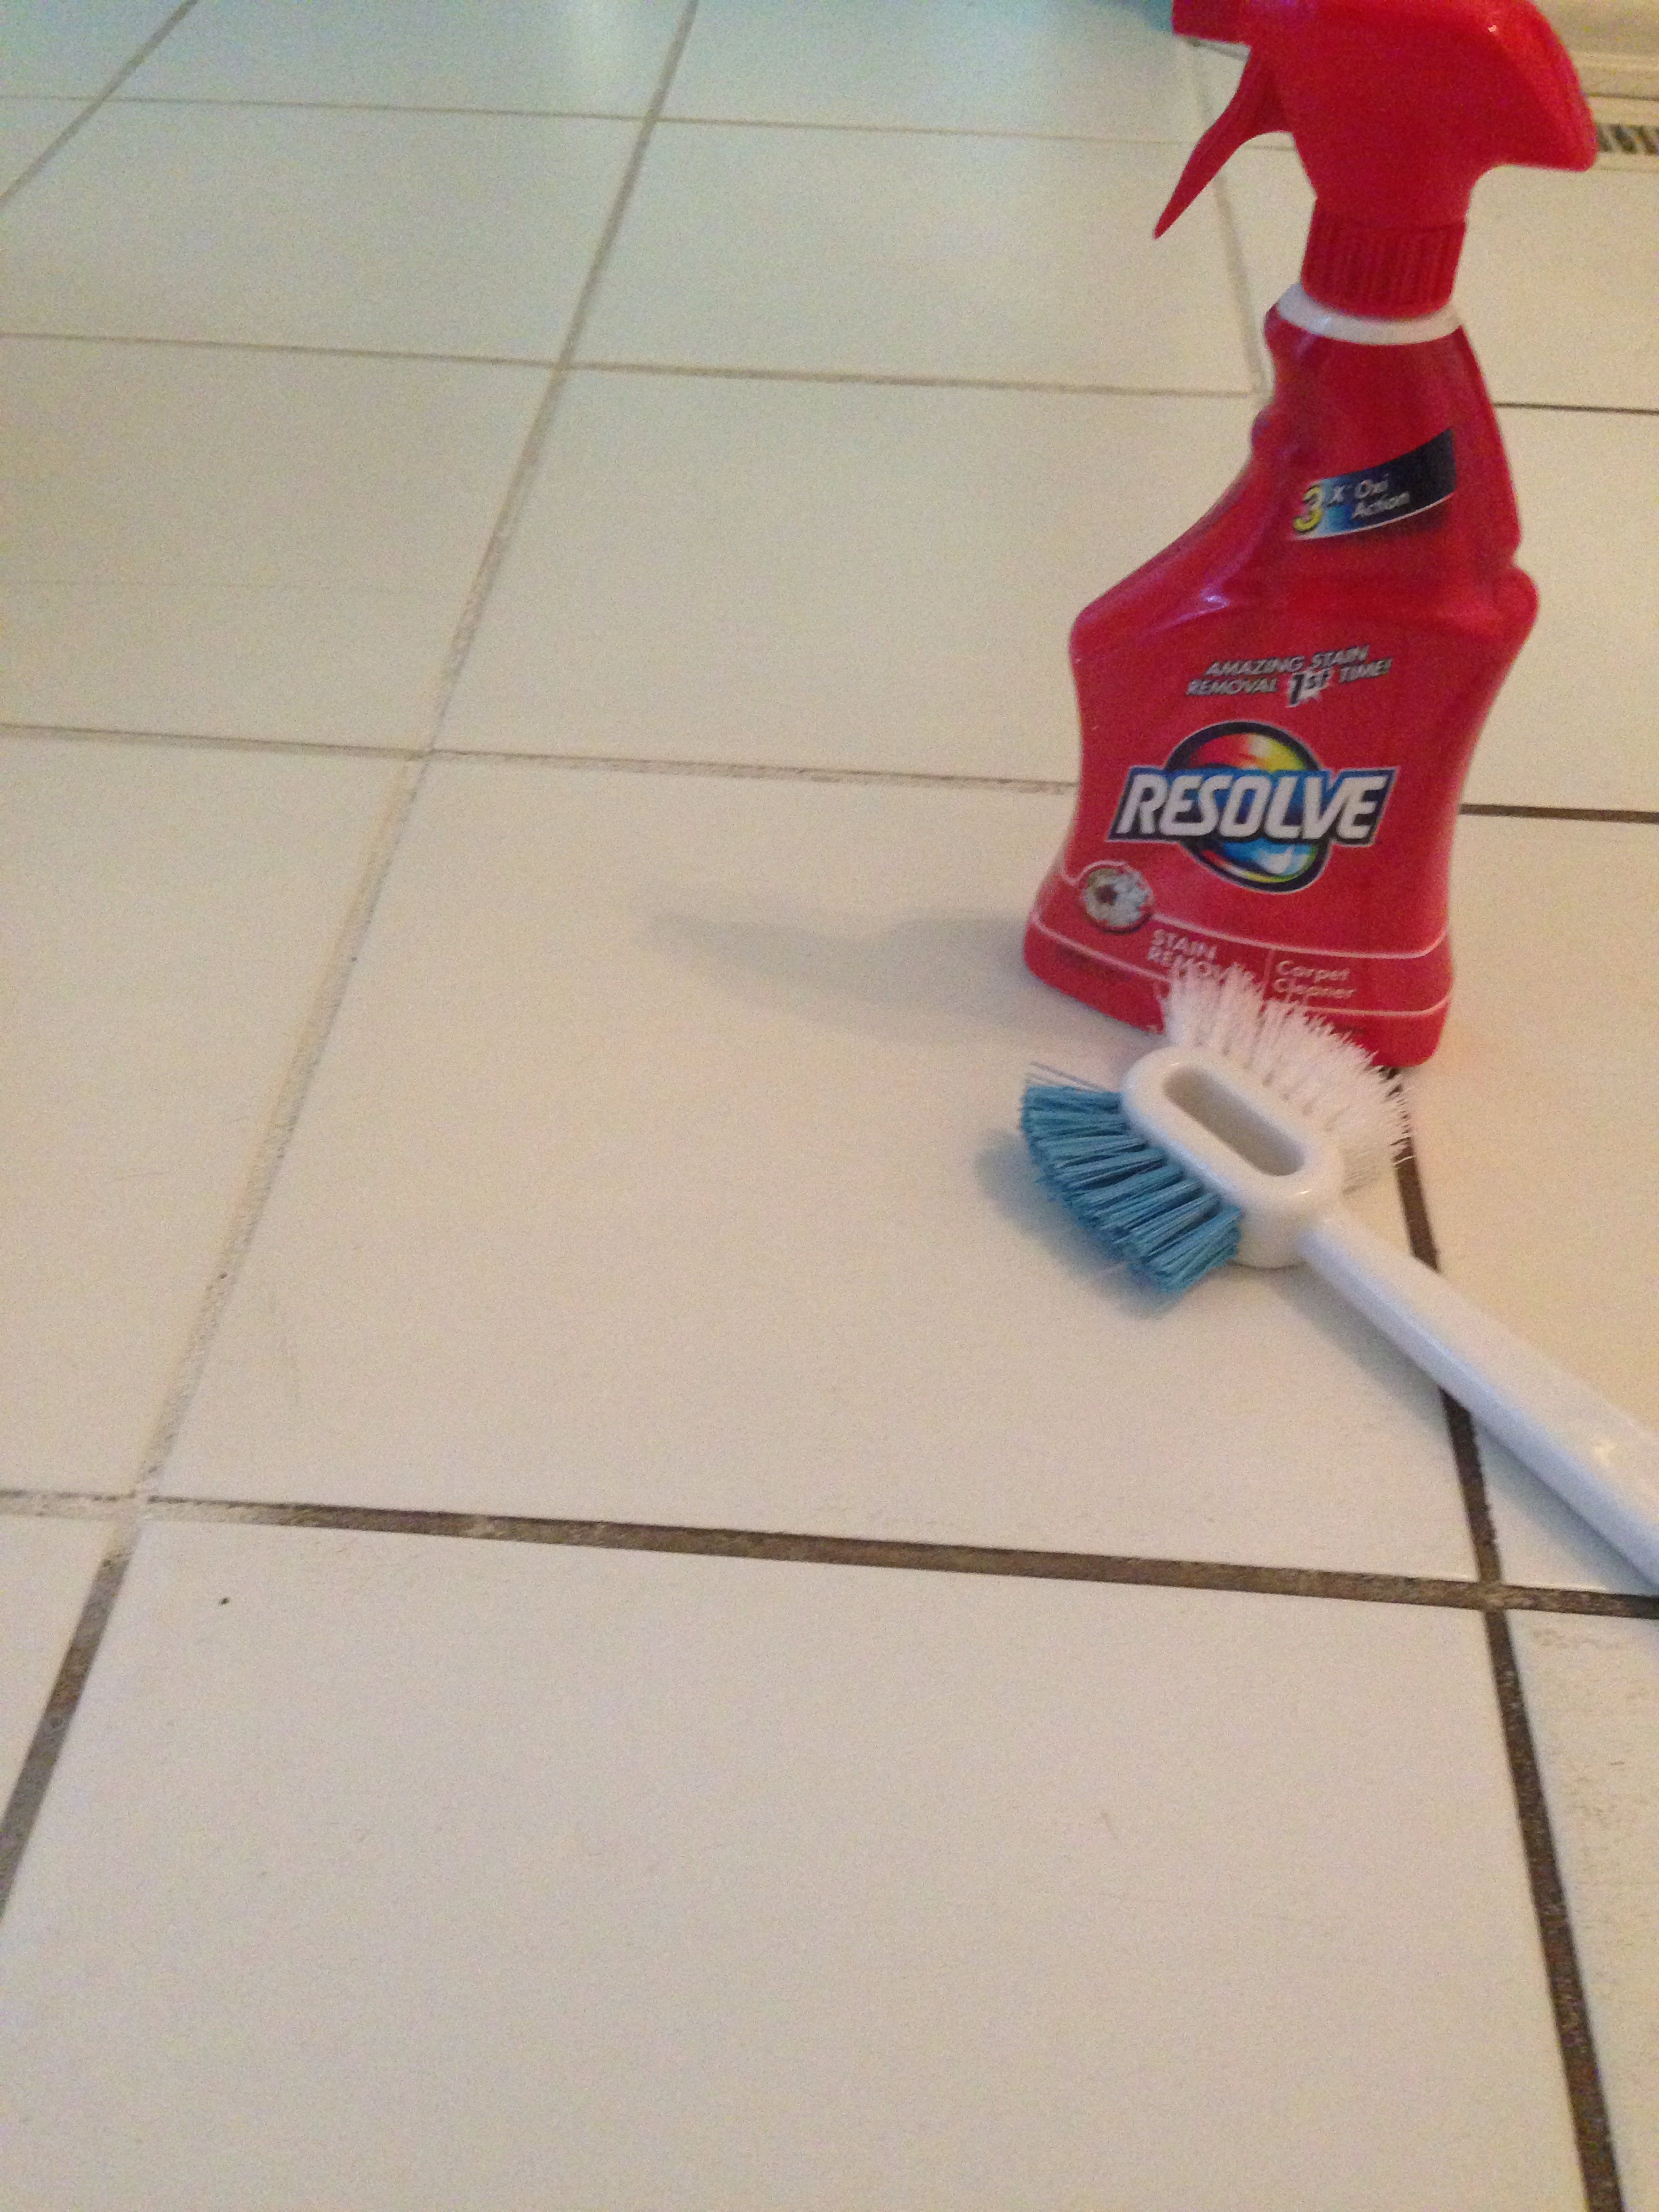 Resolve Carpet Cleaner To Clean Grout Neelums Blog